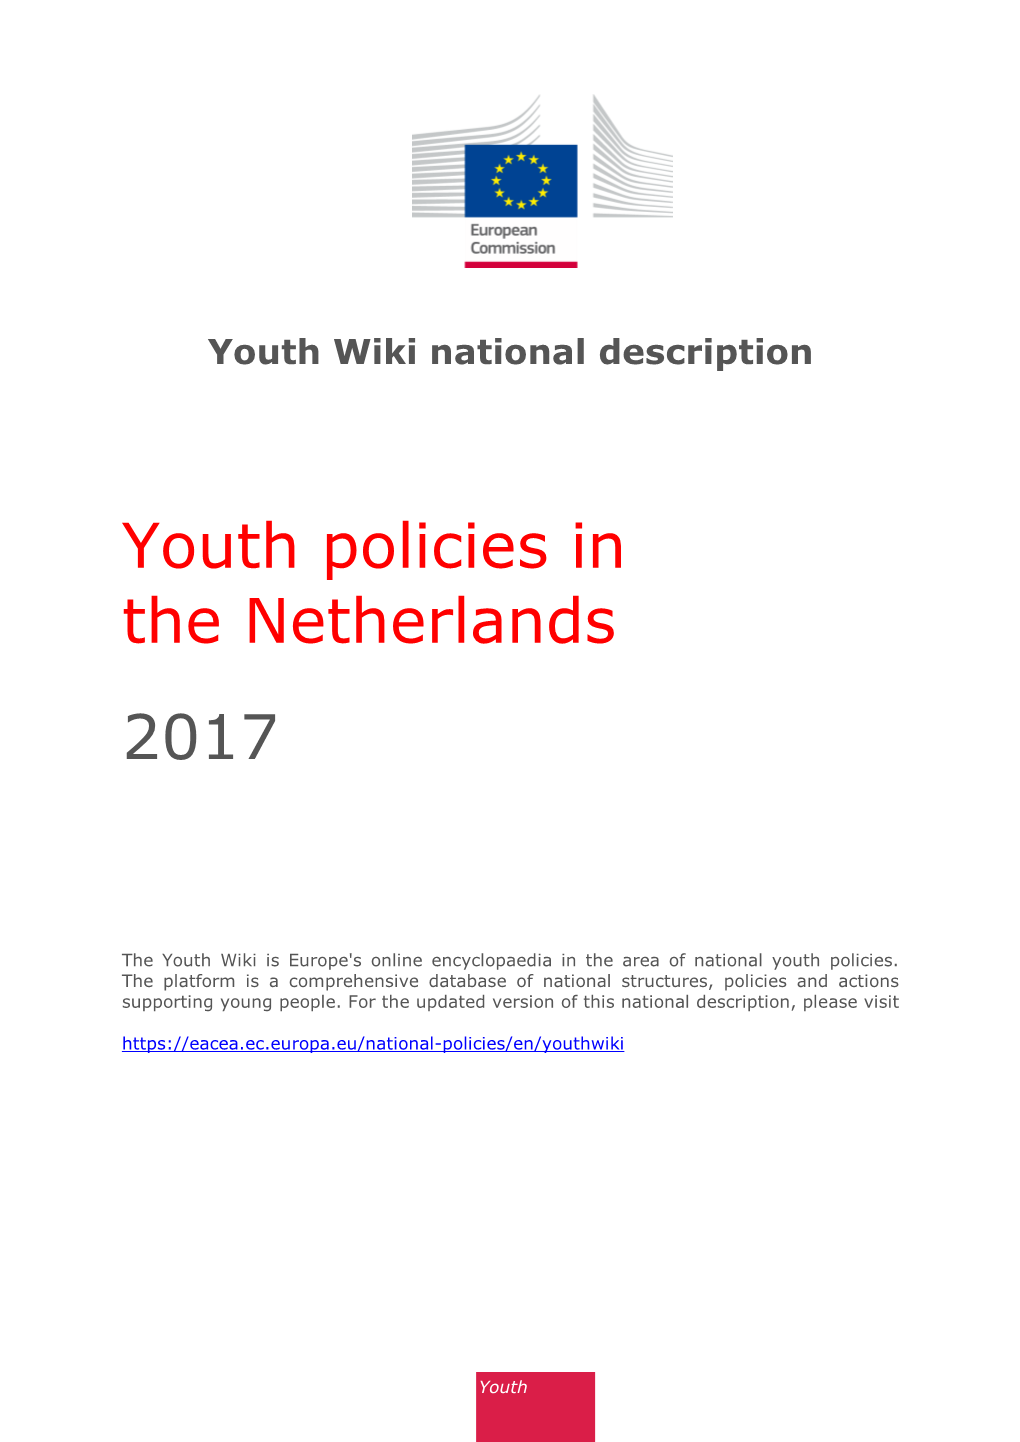 Youth Policies in the Netherlands